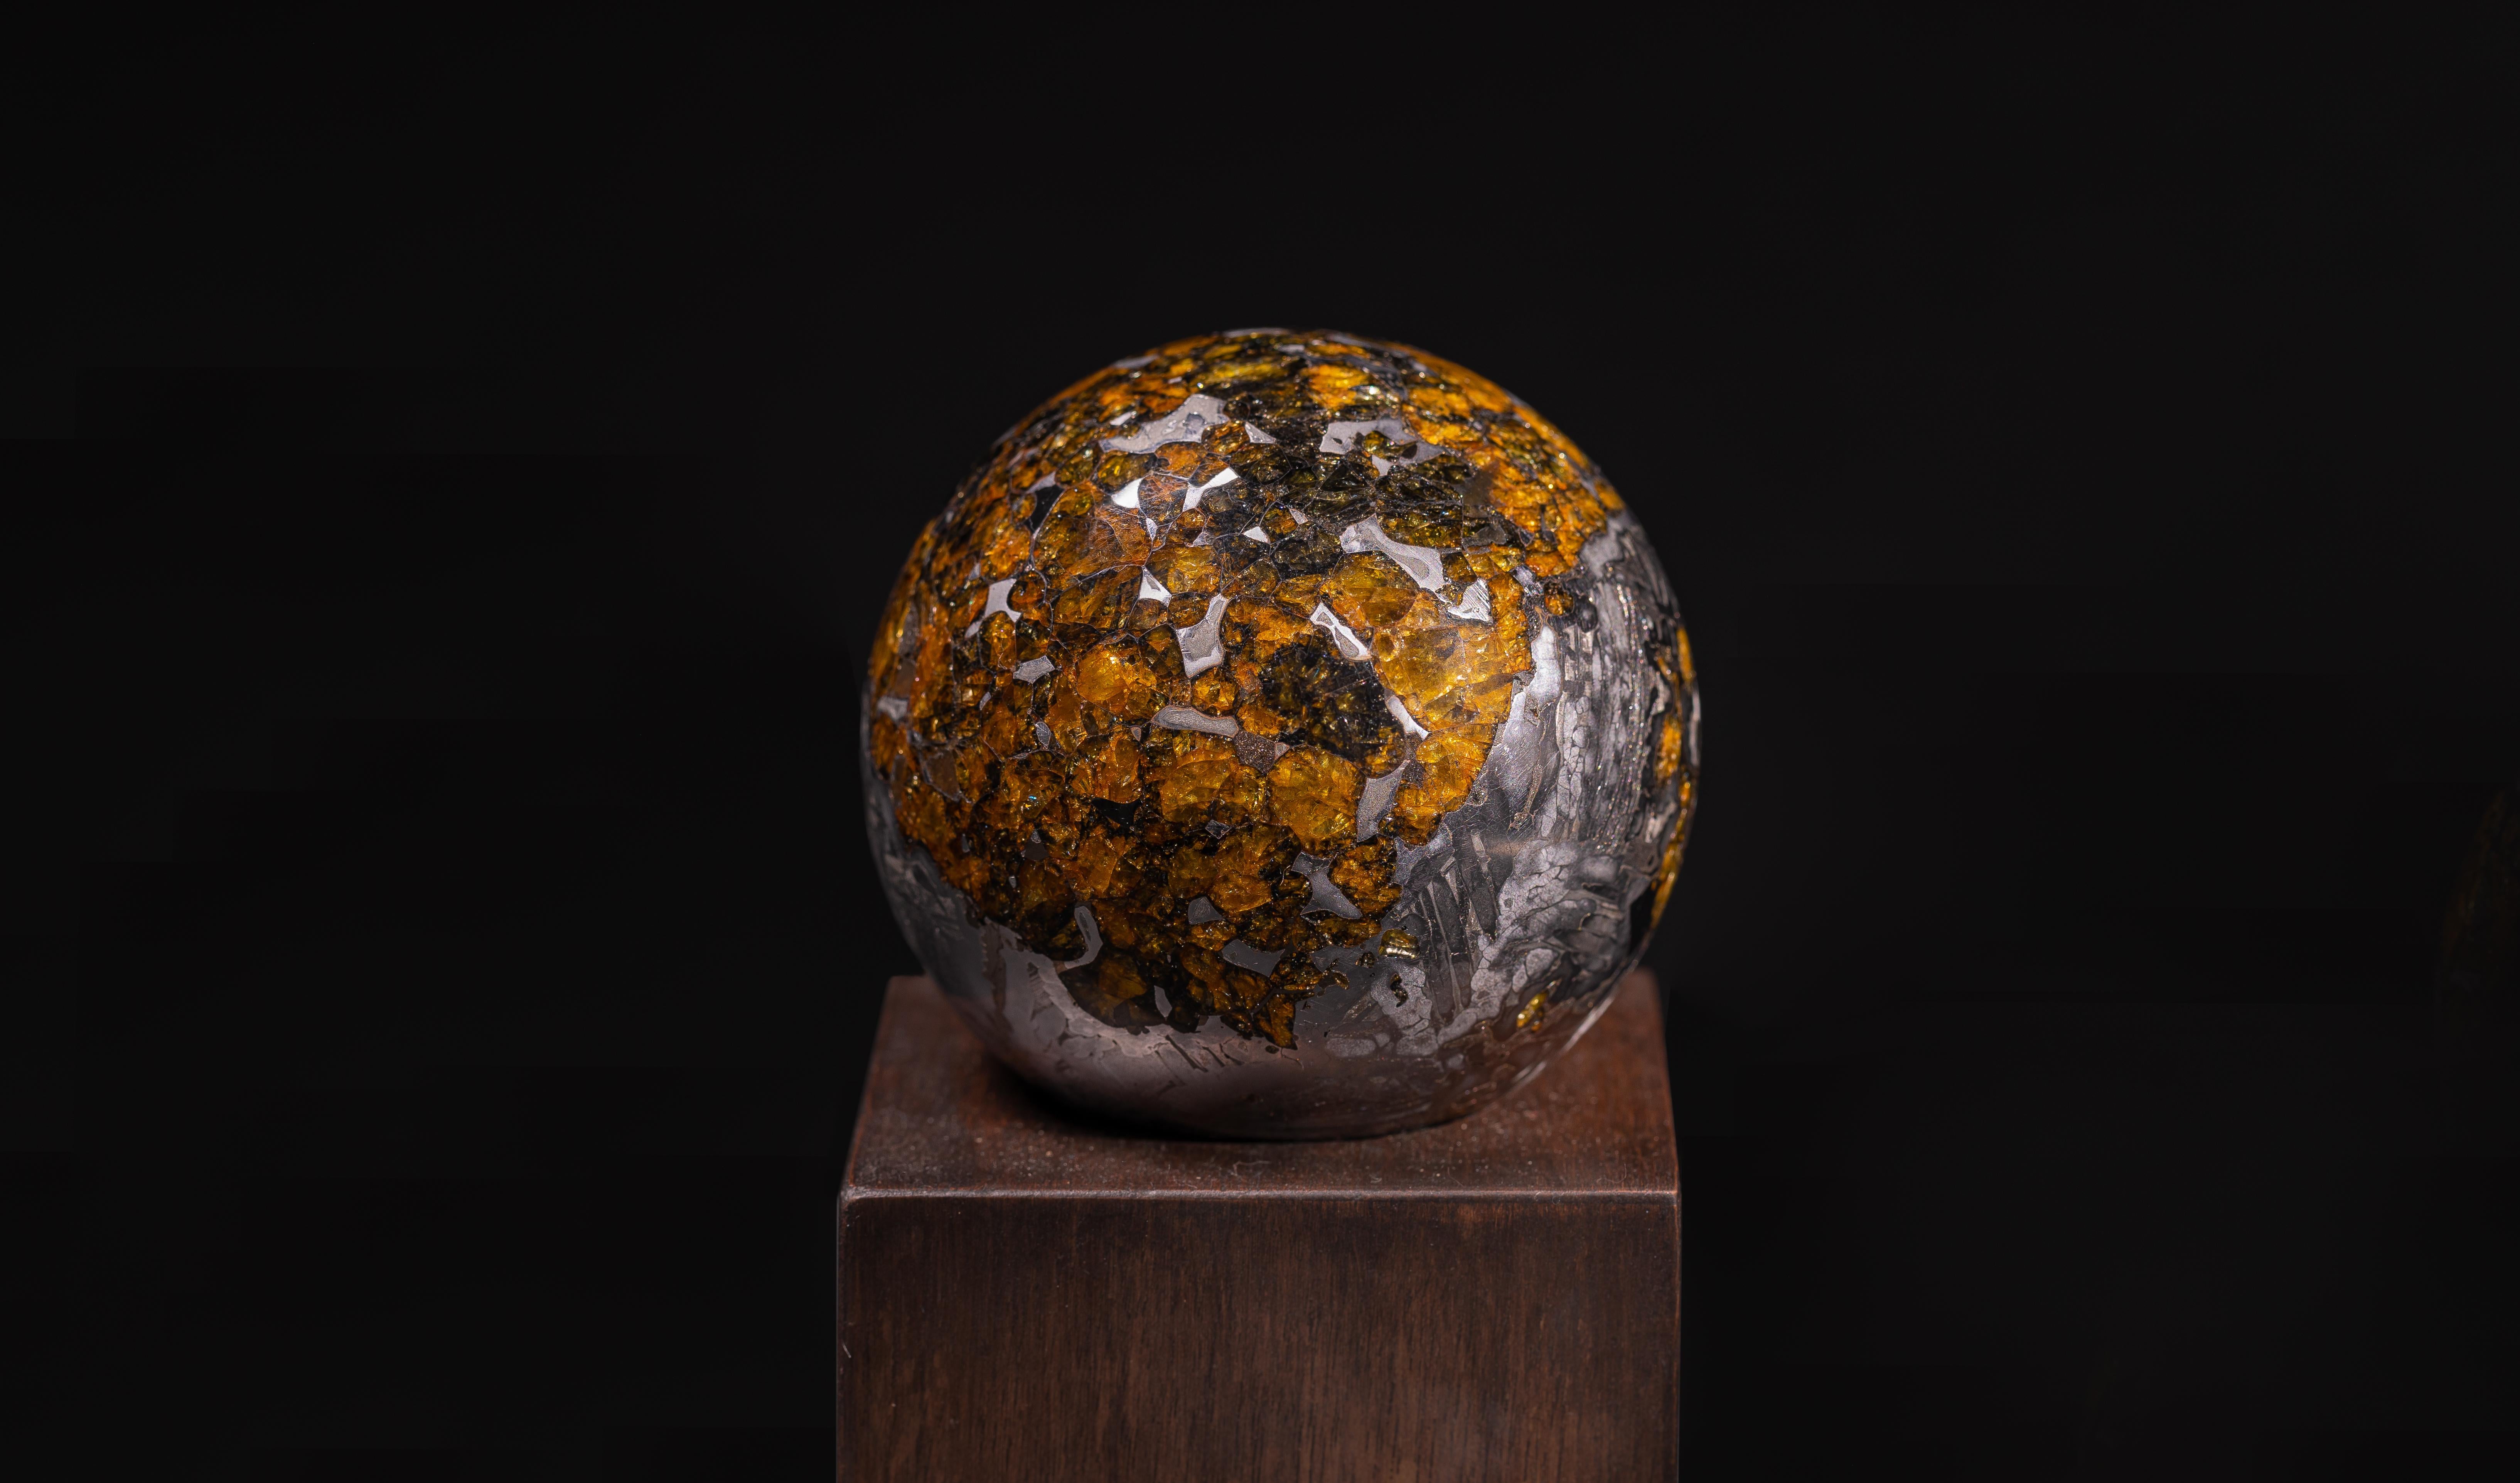 Seymchan Sphere.
Pallasite
1390 g

Comprising less than 0.2% of all meteorites, pallasites, made up of an iron-nickel matrix interwoven with amber-coloured olivine gemstones, are perhaps the most dazzling meteorites of all. This piece, extracted